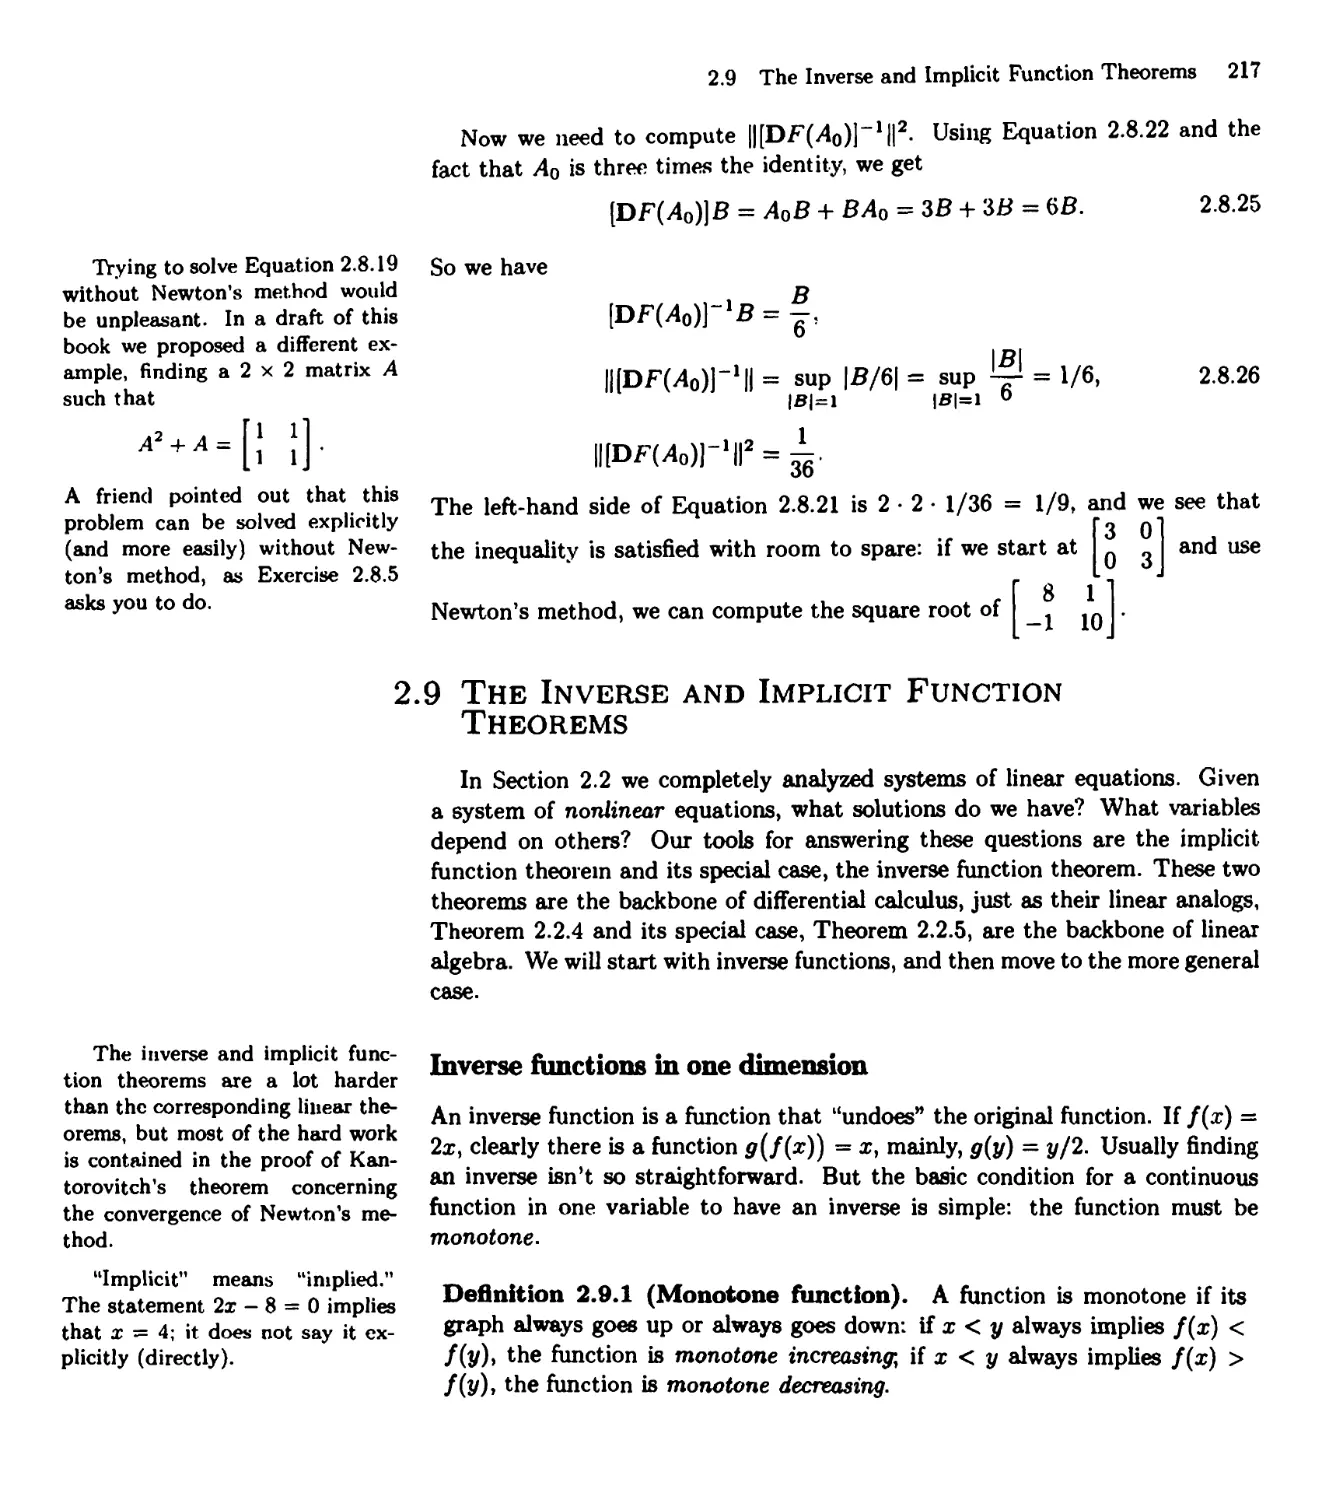 2.9 The Inverse and Implicit Function Theorems